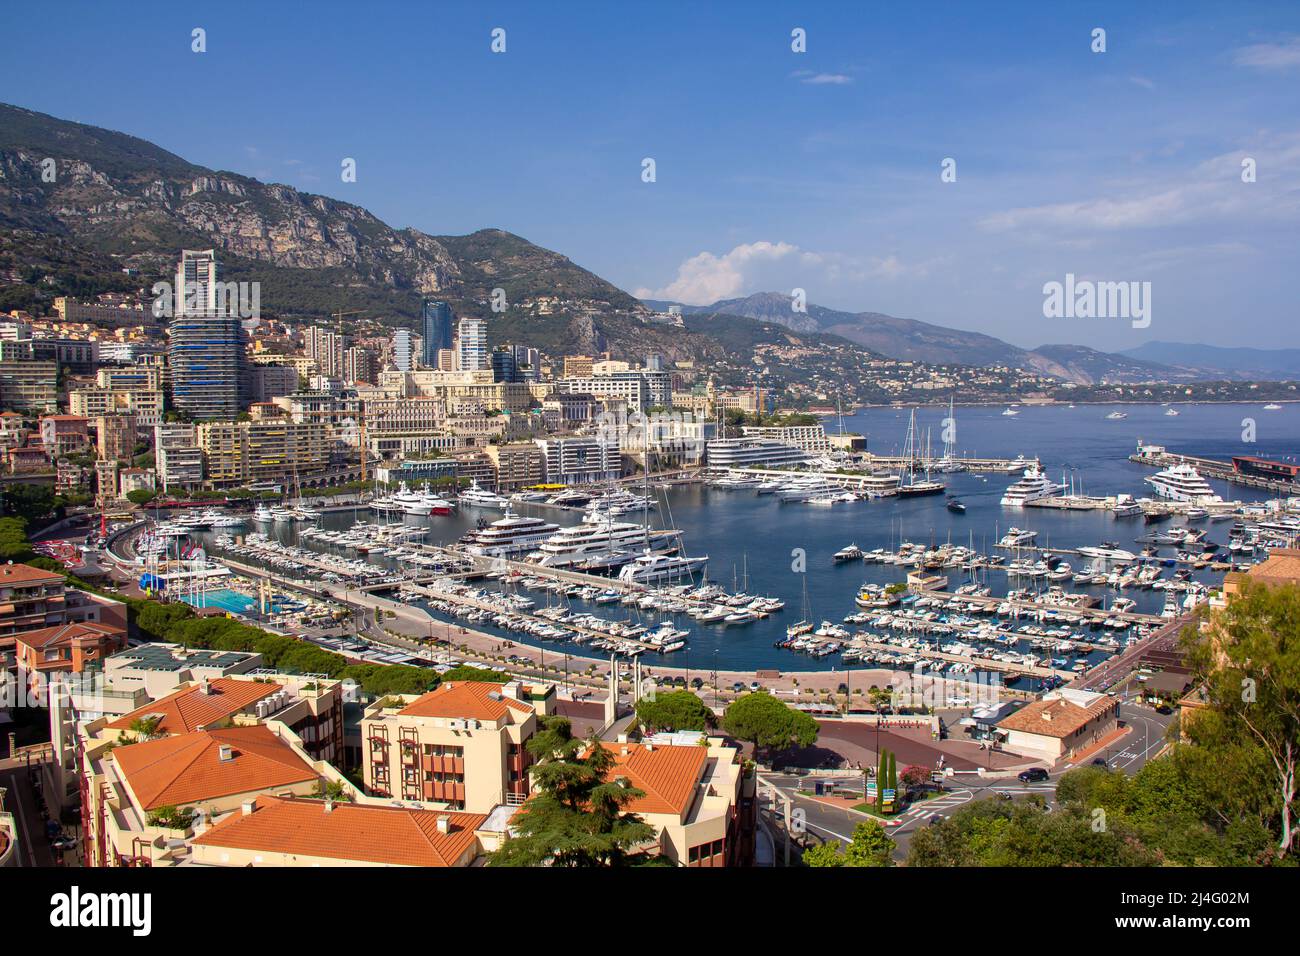 Panoramic aerial view of Monaco and Port Hercule, sweeping views of the city, mountains and harbor, luxury yachts and apartments in La Condamine distr Stock Photo